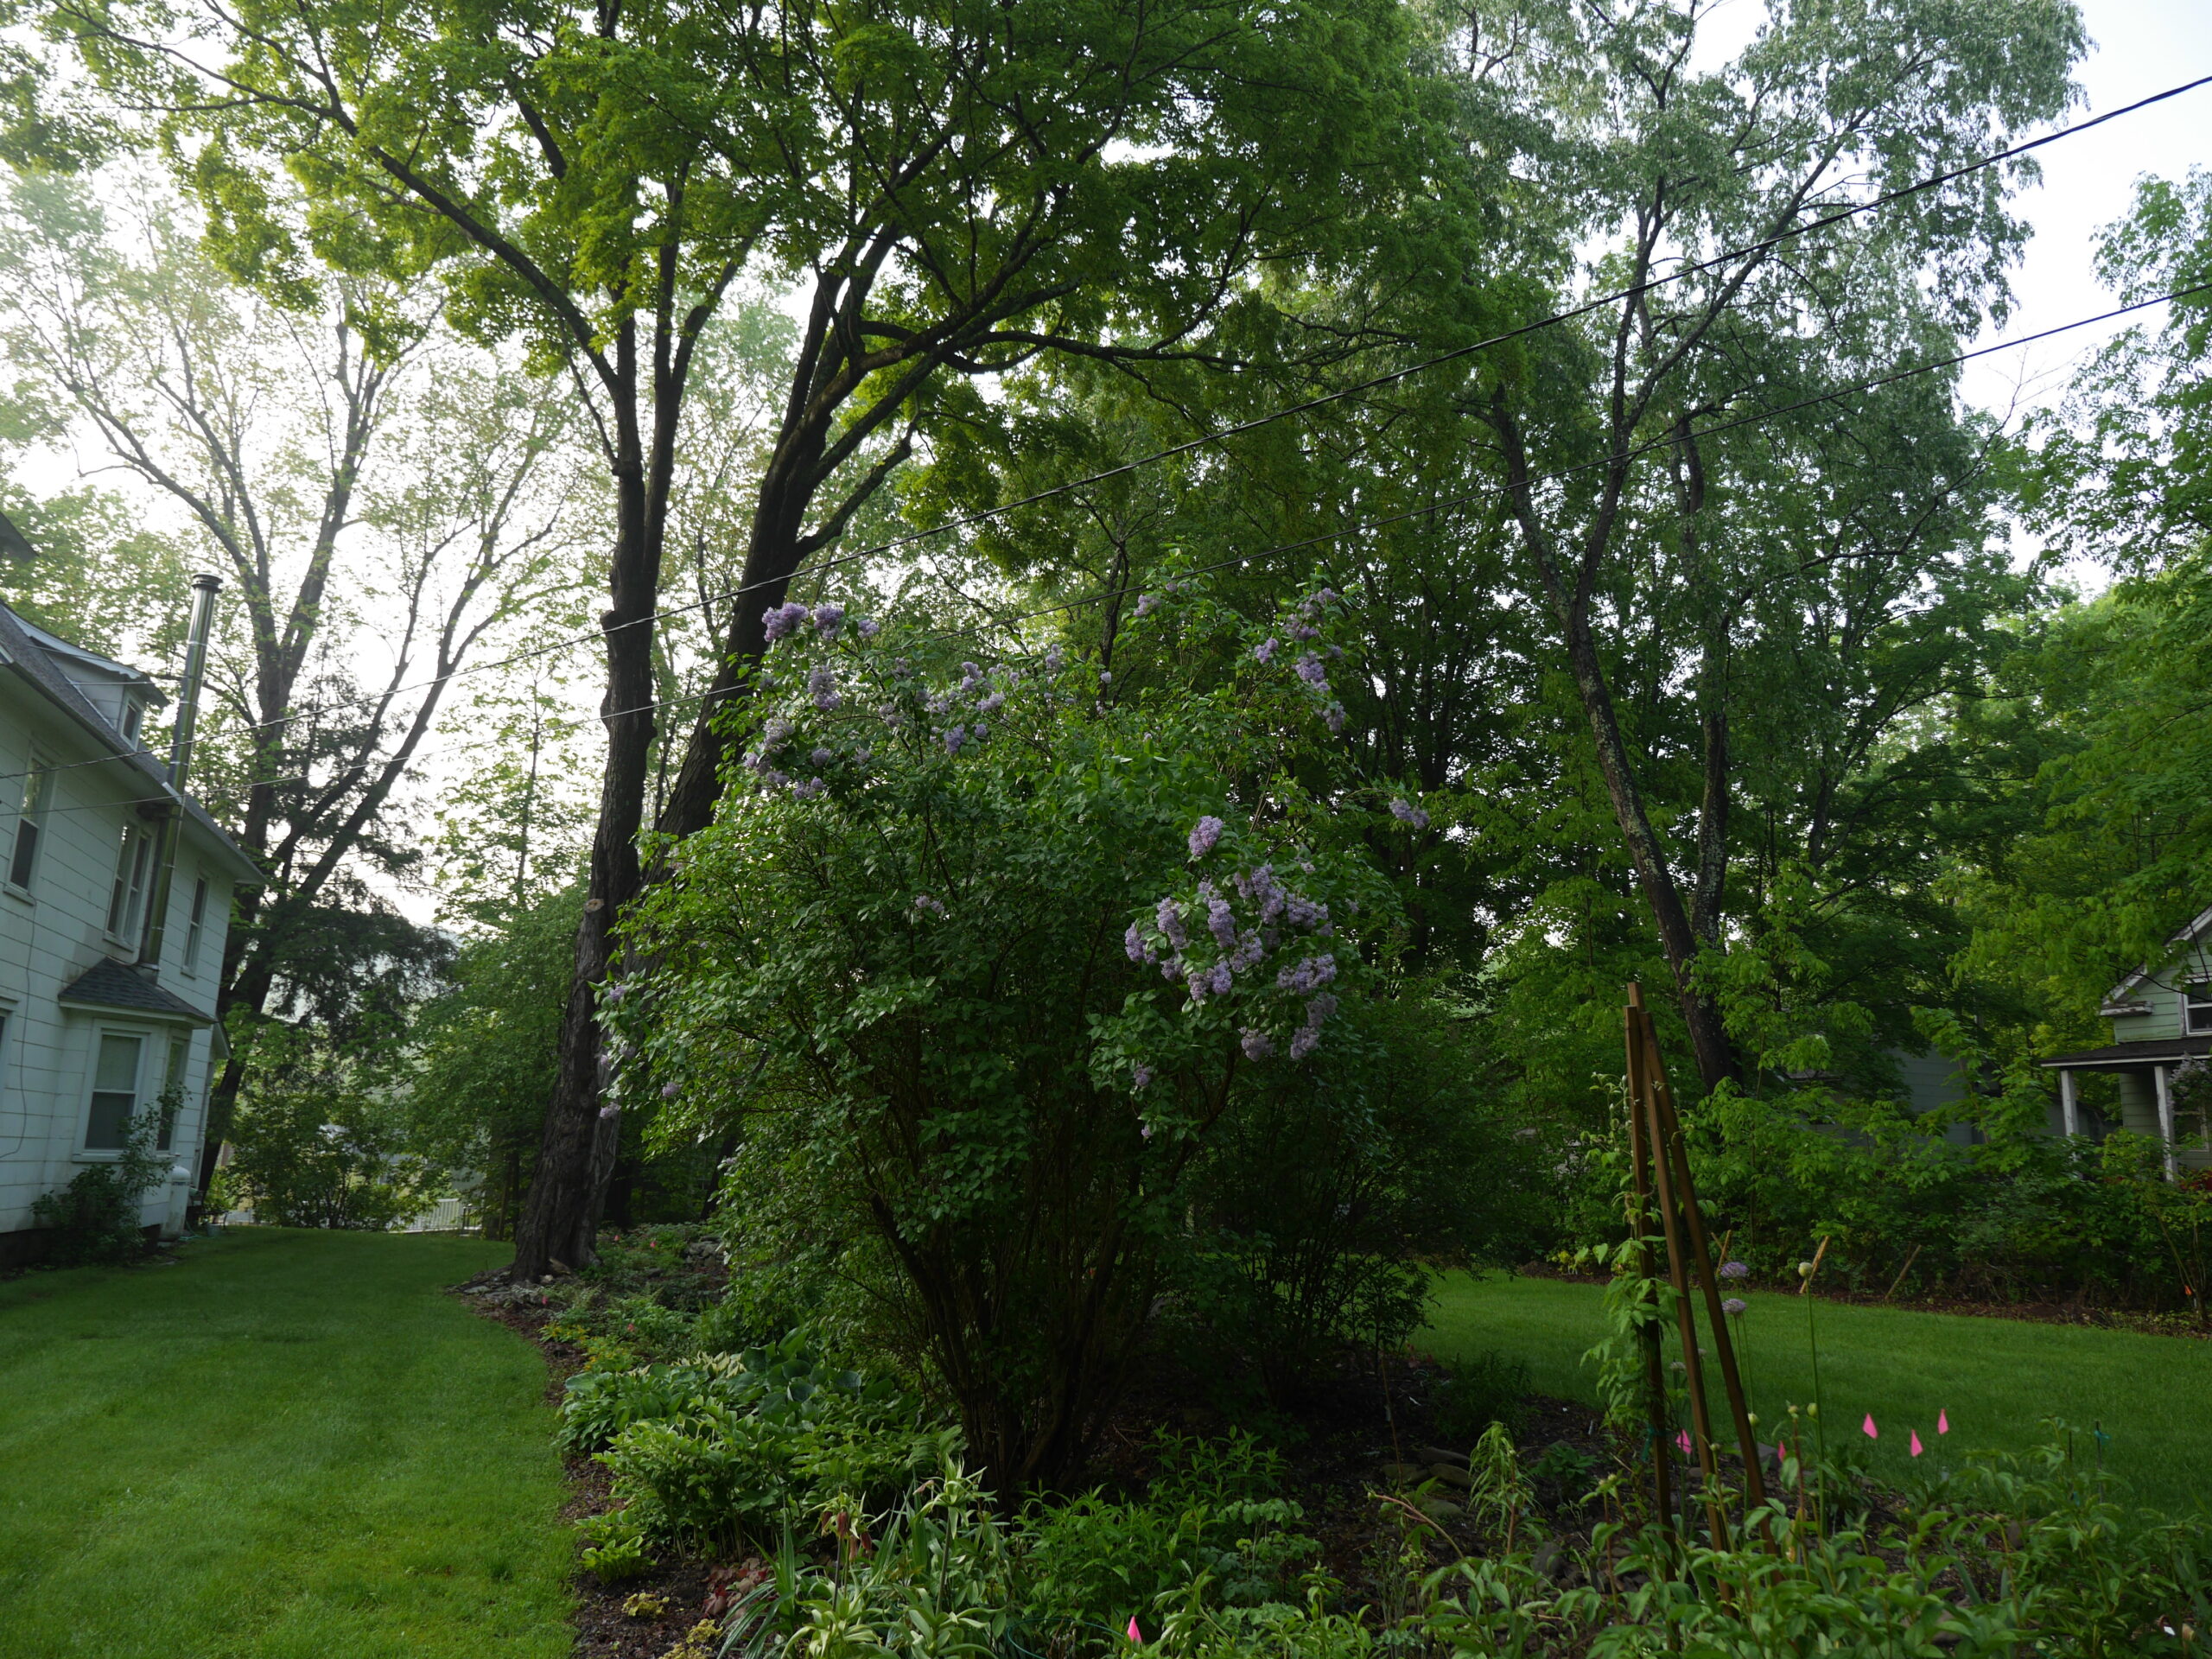 Several older and taller lilacs in the center of this perennial island provide afternoon (this is an early morning shot) shade to the hostas on the left.  Miss Kim, on the right, is coming into full bloom as the older species to the left only has a few blooms remaining at the top.